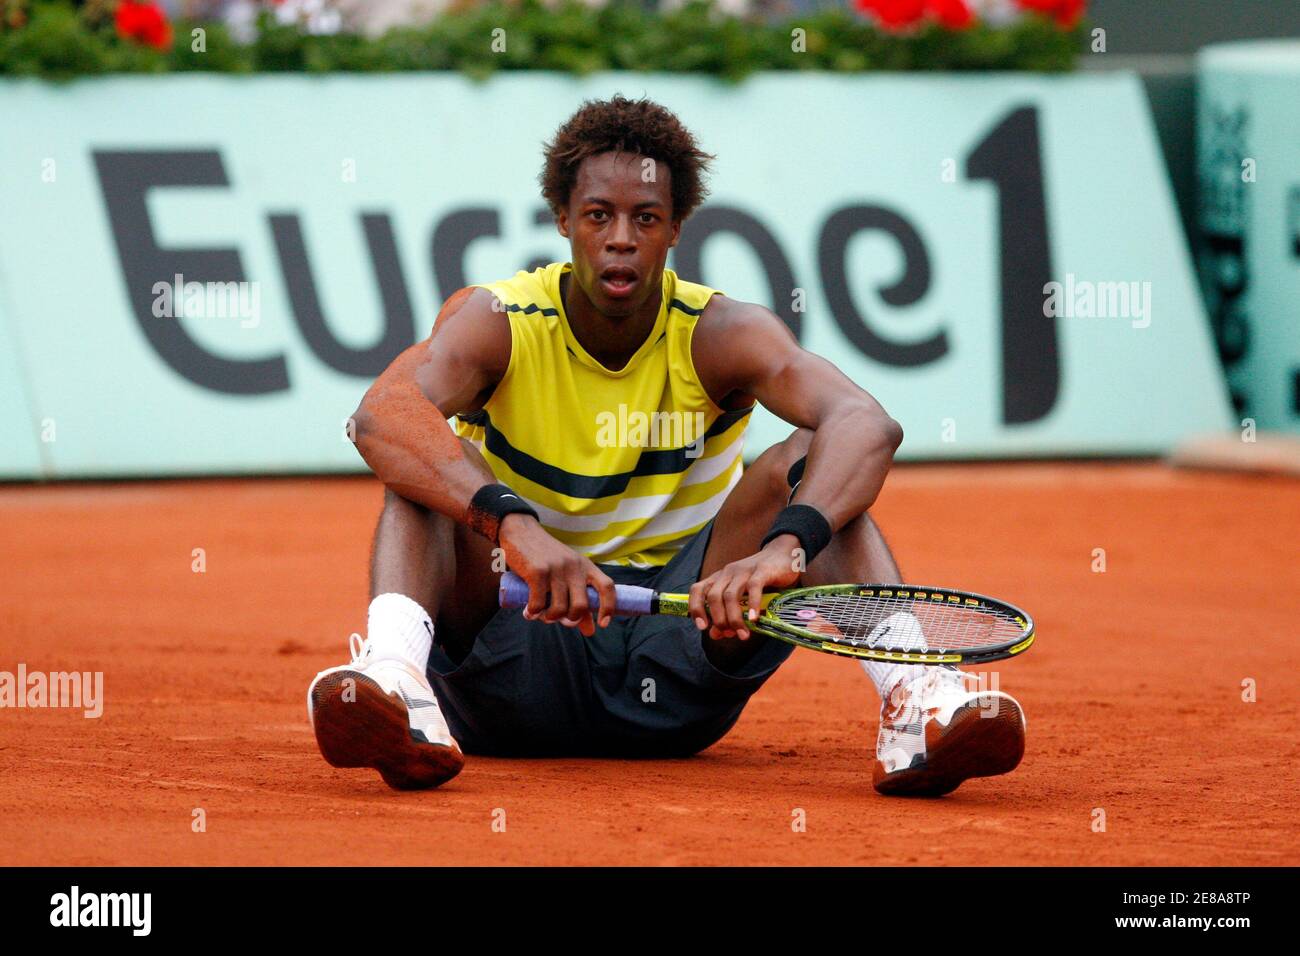 Gael Monfils of France sits on the court during his match against Victor  Crivoi of Romania at the French Open tennis tournament at Roland Garros in  Paris May 28, 2009. REUTERS/Vincent Kessler (